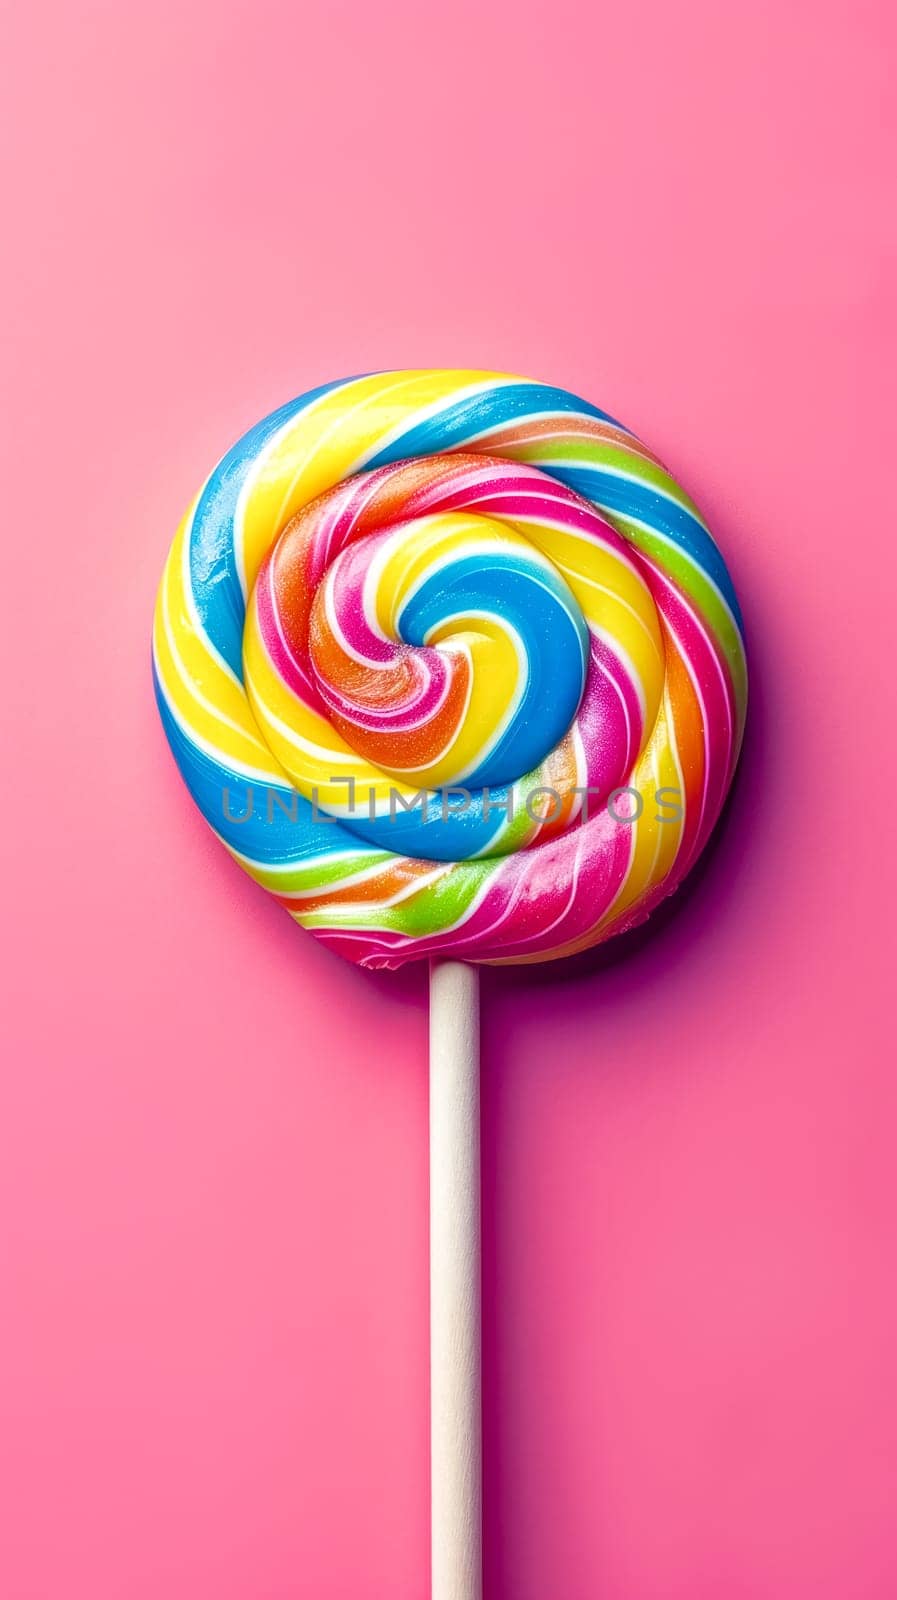 Colorful lollipop on pink background by Edophoto